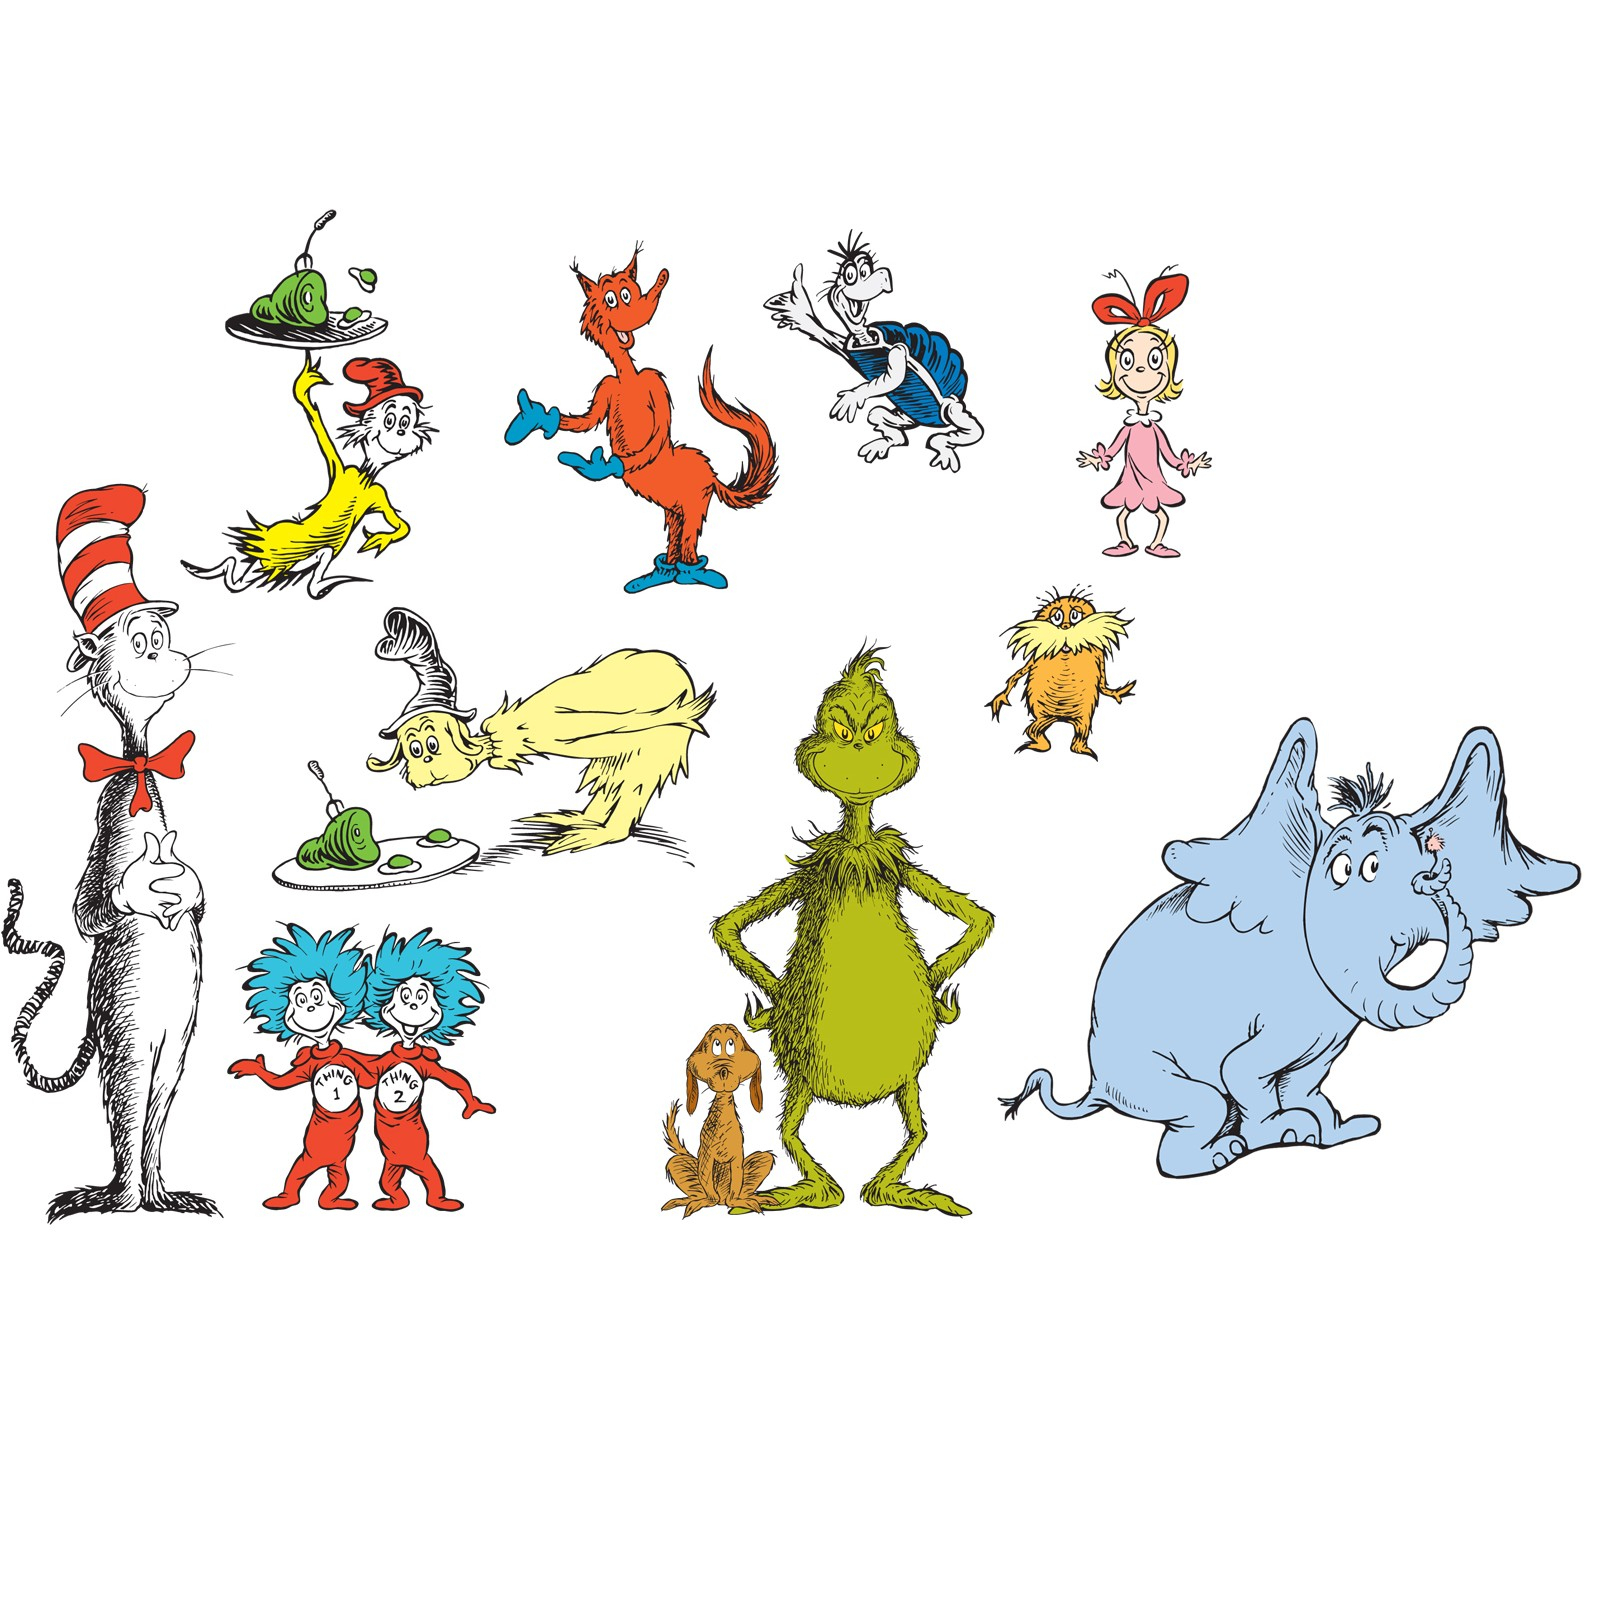 Free Dr. Seuss Characters, Download Free Clip Art, Free Clip Art On - Free Printable Pictures Of Dr Seuss Characters